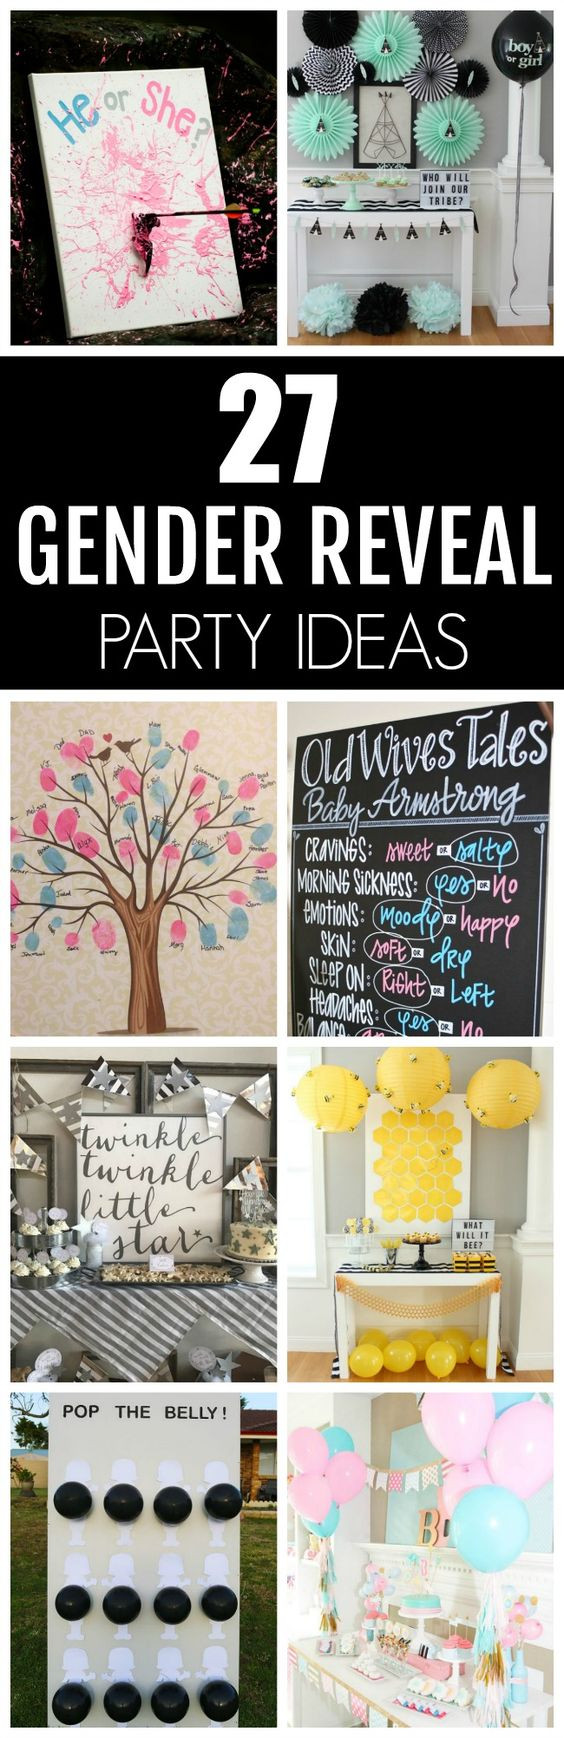 Gender Reveal Party Ideas Country
 27 Creative Gender Reveal Party Ideas Pretty My Party